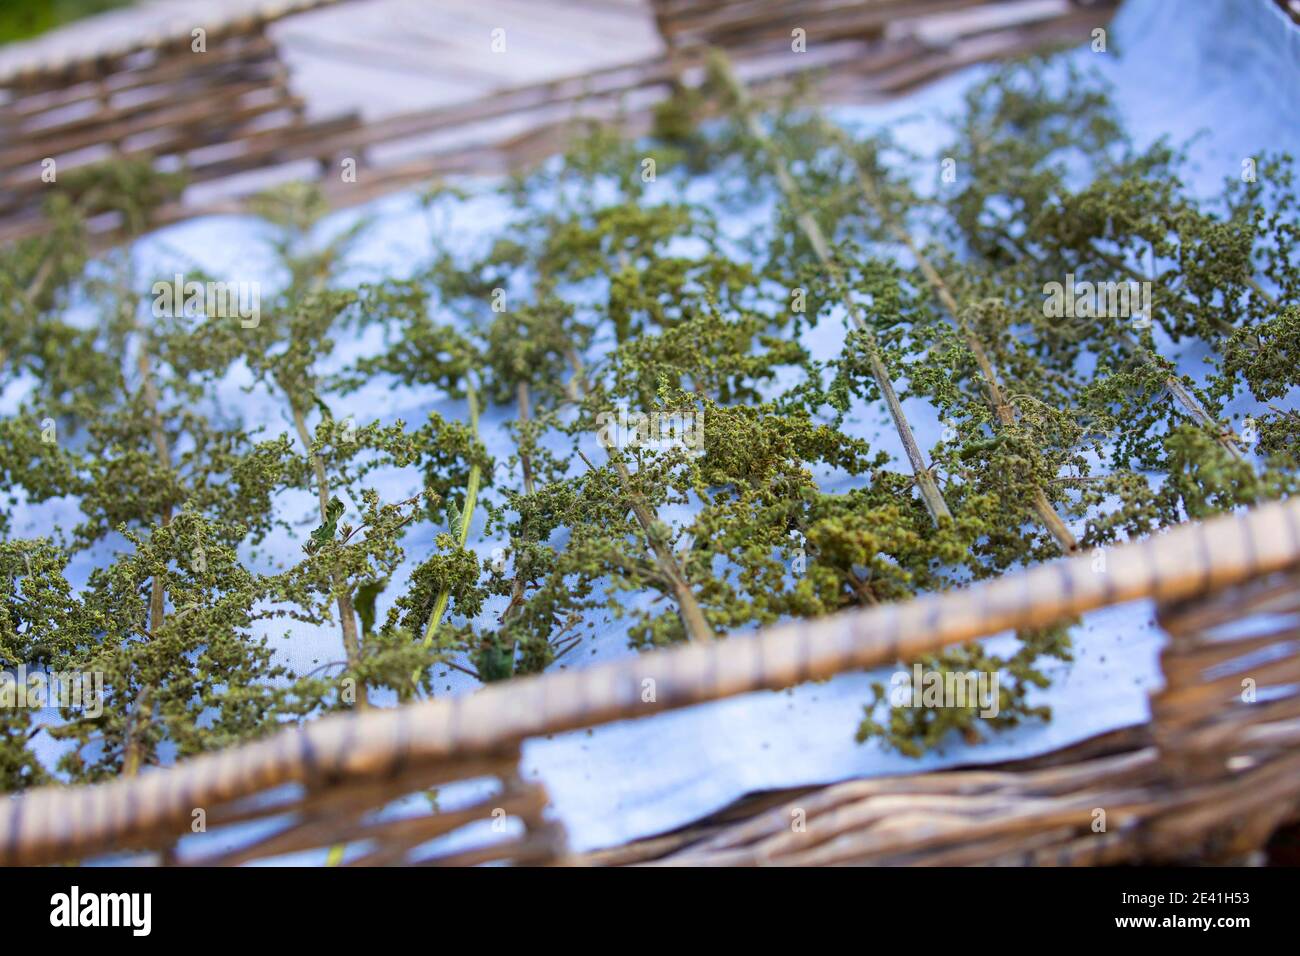 stinging nettle (Urtica dioica), stalks with nettle seeds are dried on a tray, Germany Stock Photo